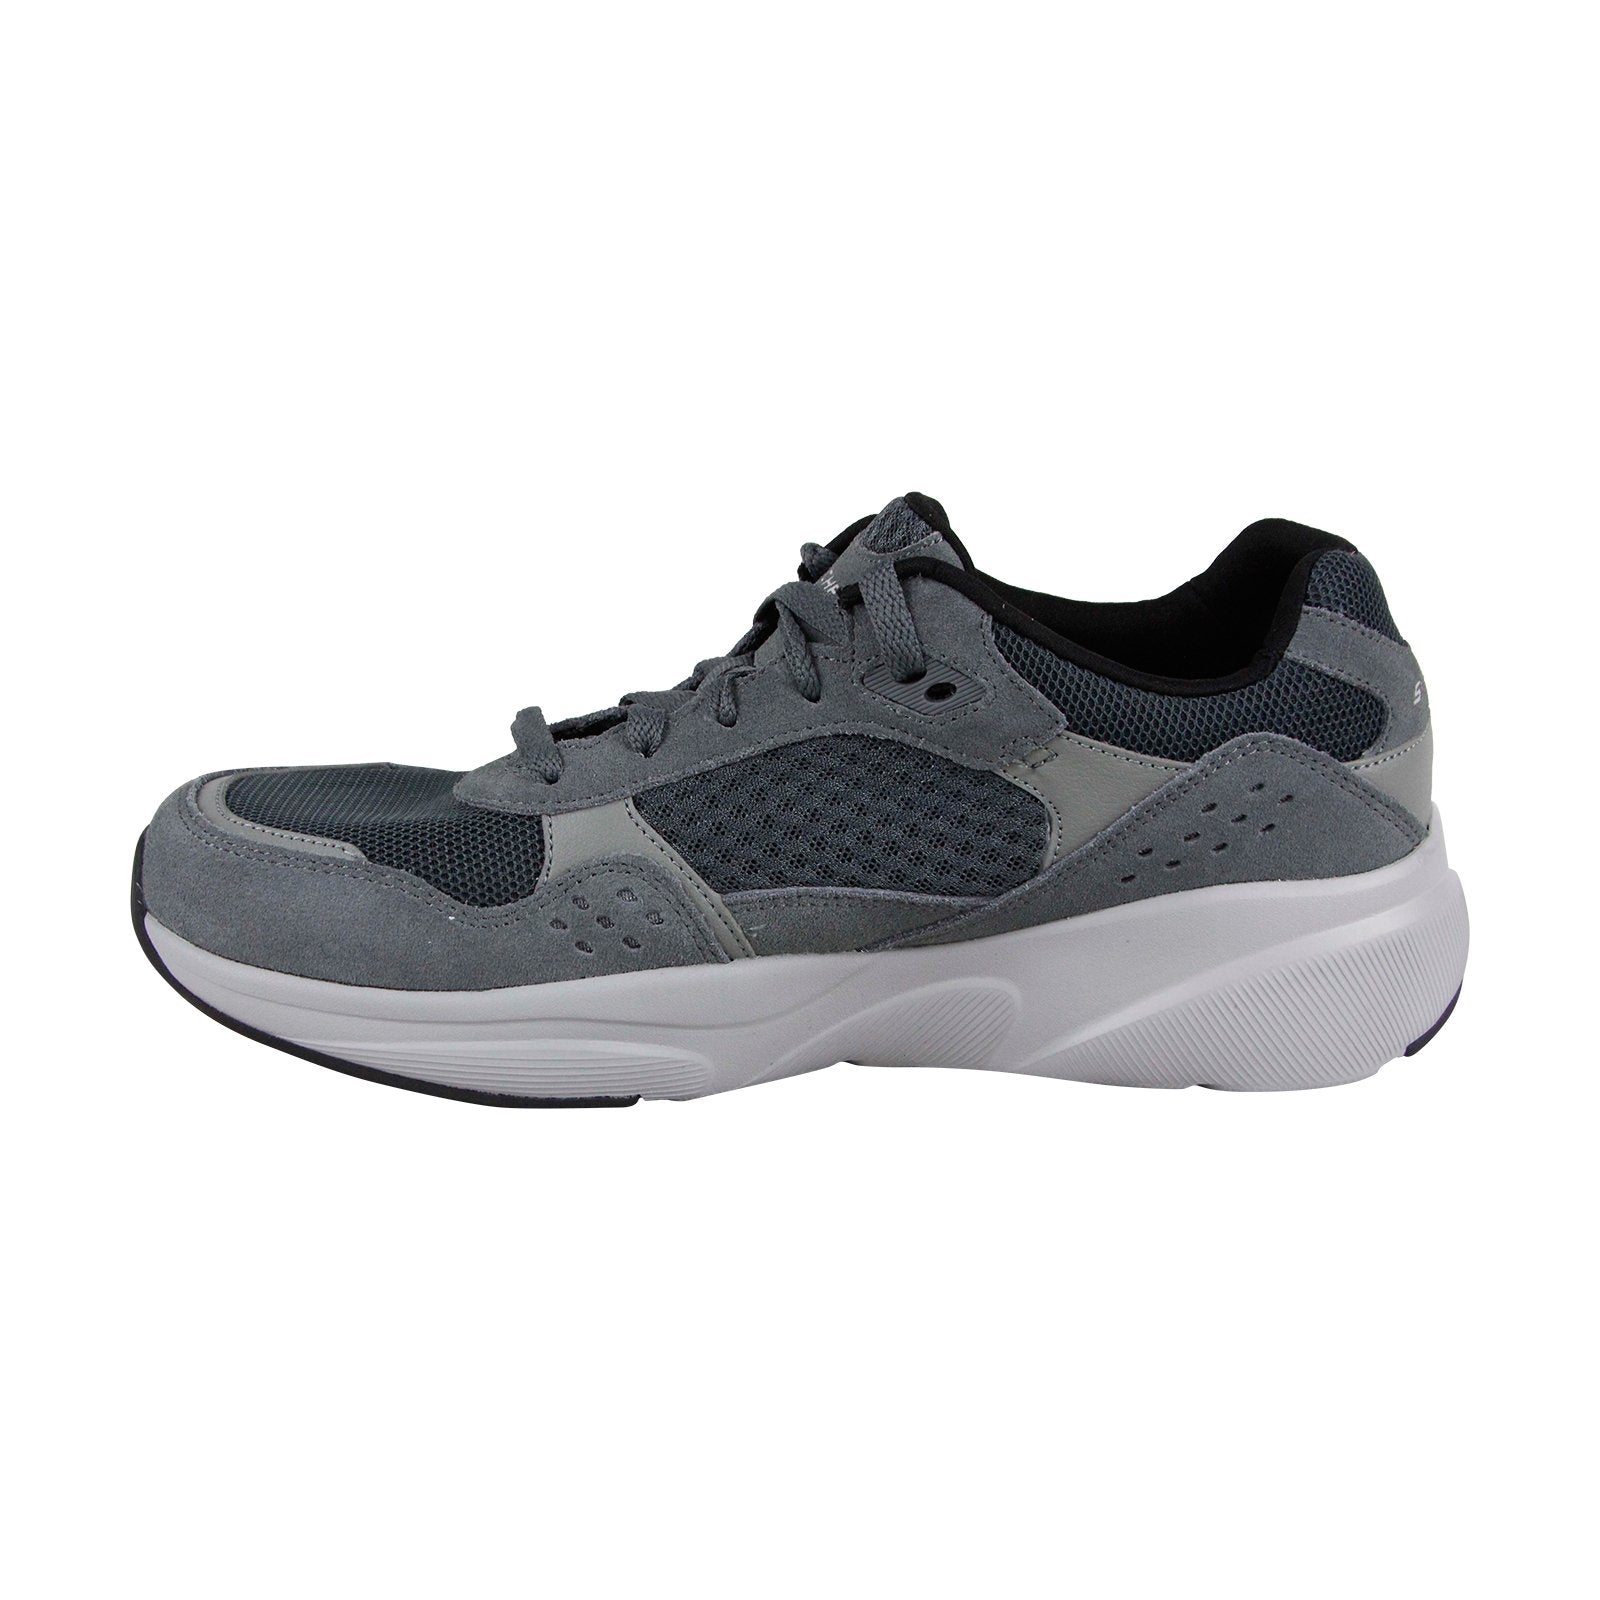 Inflar chocolate acuerdo Skechers Meridian Ostwall 52952 Mens Gray Mesh Lace Up Lifestyle Sneak -  Ruze Shoes